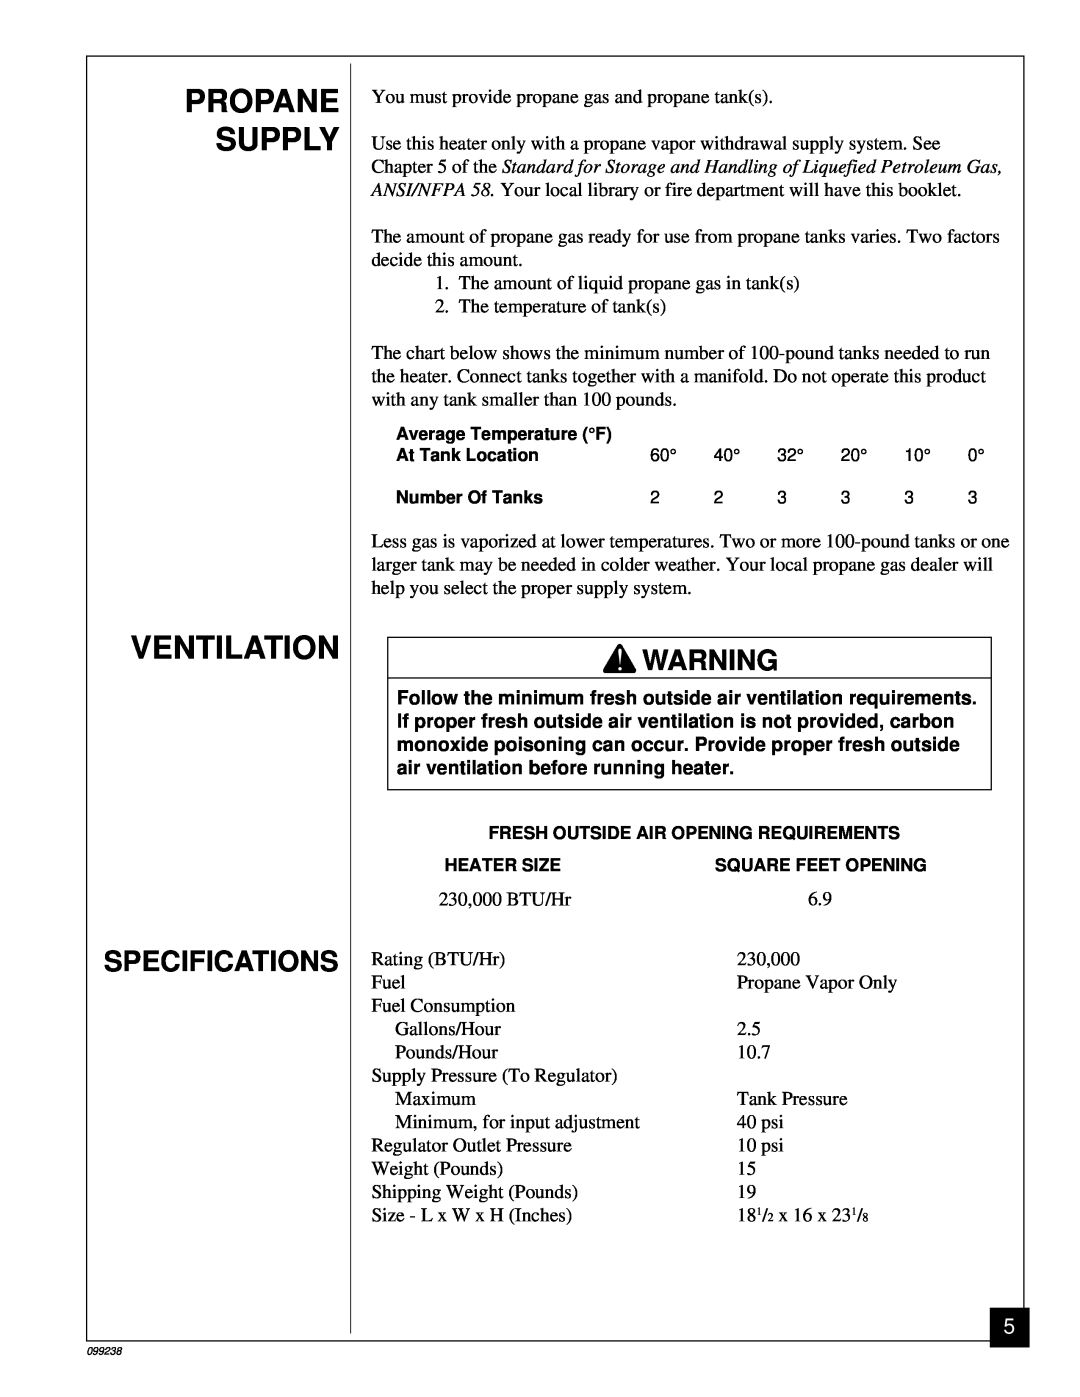 Homelite HP275 owner manual Propane Supply Ventilation, Specifications 